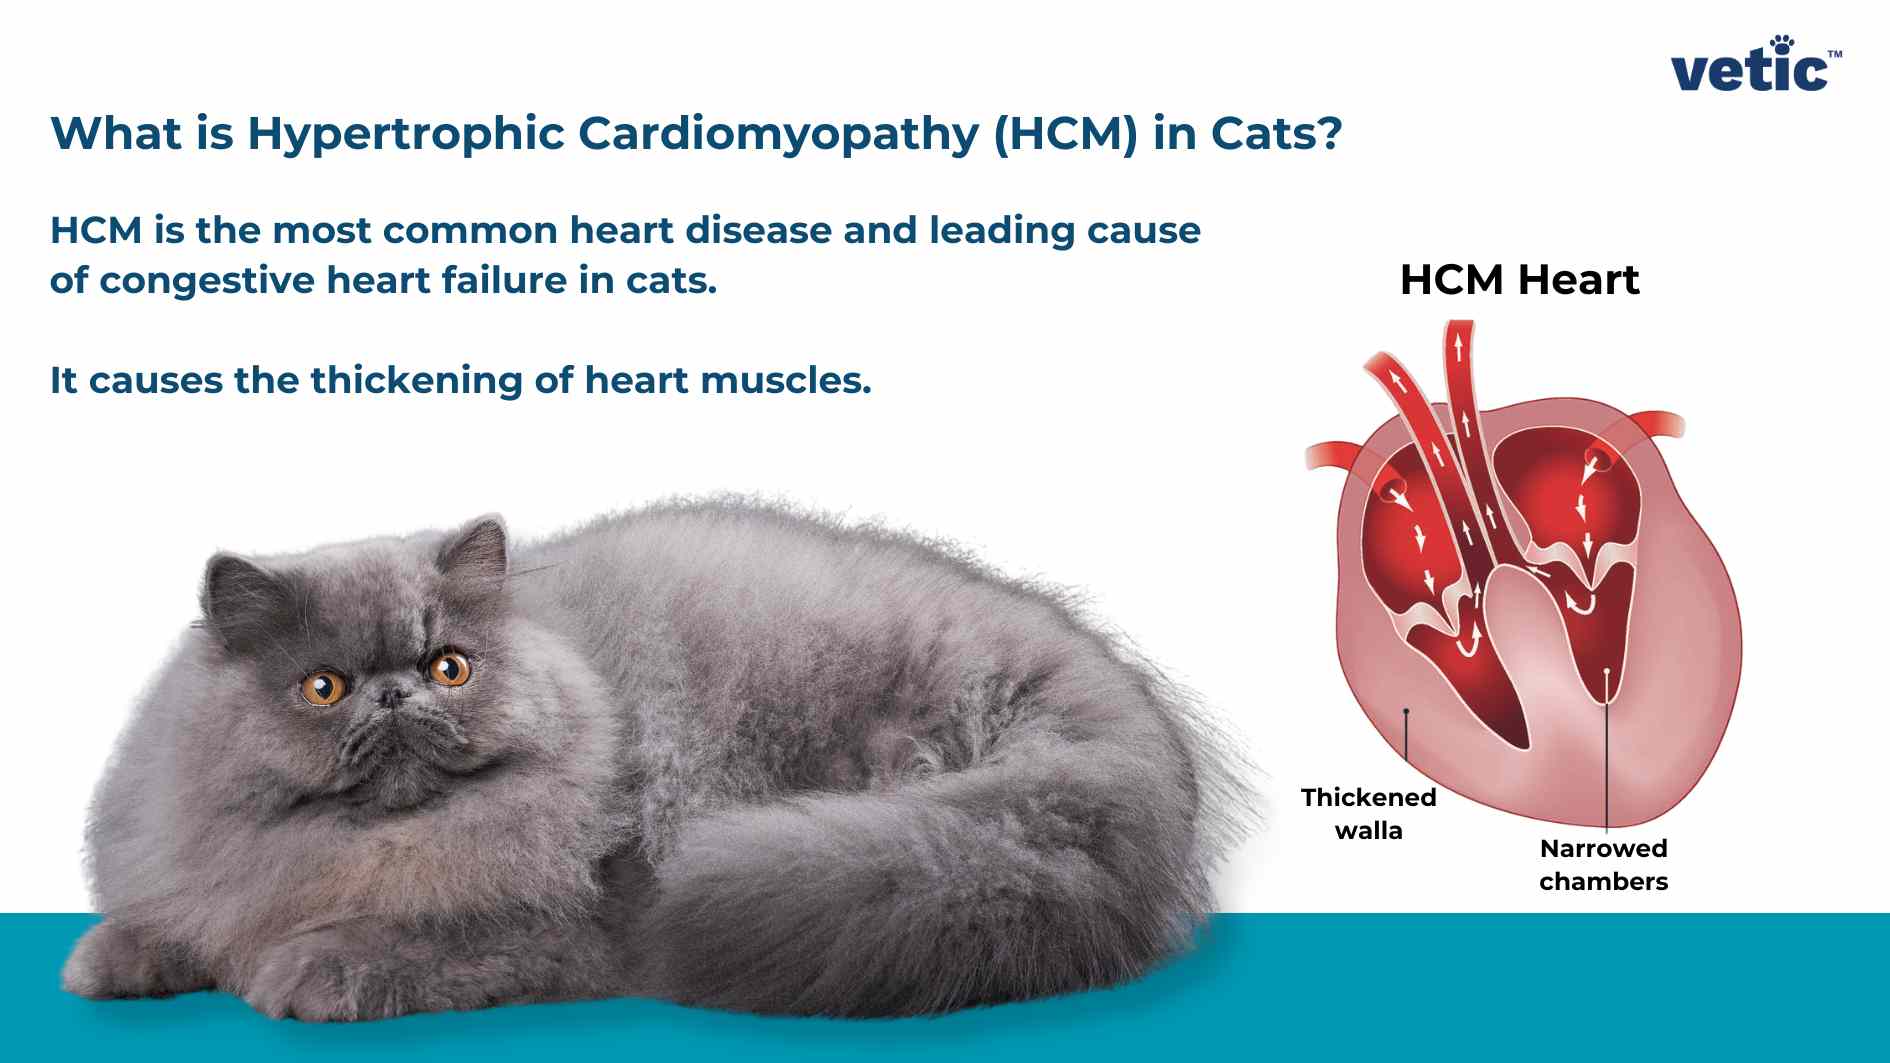 An informational image about Hypertrophic Cardiomyopathy (HCM) in cats, featuring a grey cat and a diagram of an affected heart. Description: The image is informational and focuses on explaining Hypertrophic Cardiomyopathy (HCM) in cats. On the left side, there is a grey cat lying down, looking towards the camera. The background is plain with a gradient from white to light blue at the bottom. At the top left corner, there’s text explaining what HCM is and stating that it’s a common heart disease in cats causing thickening of heart muscles. On the right side, there’s a diagram of an HCM affected heart labeled “HCM Heart,” showing thickened walls and narrowed chambers. The company or organization logo “vetic” appears at the top right corner.